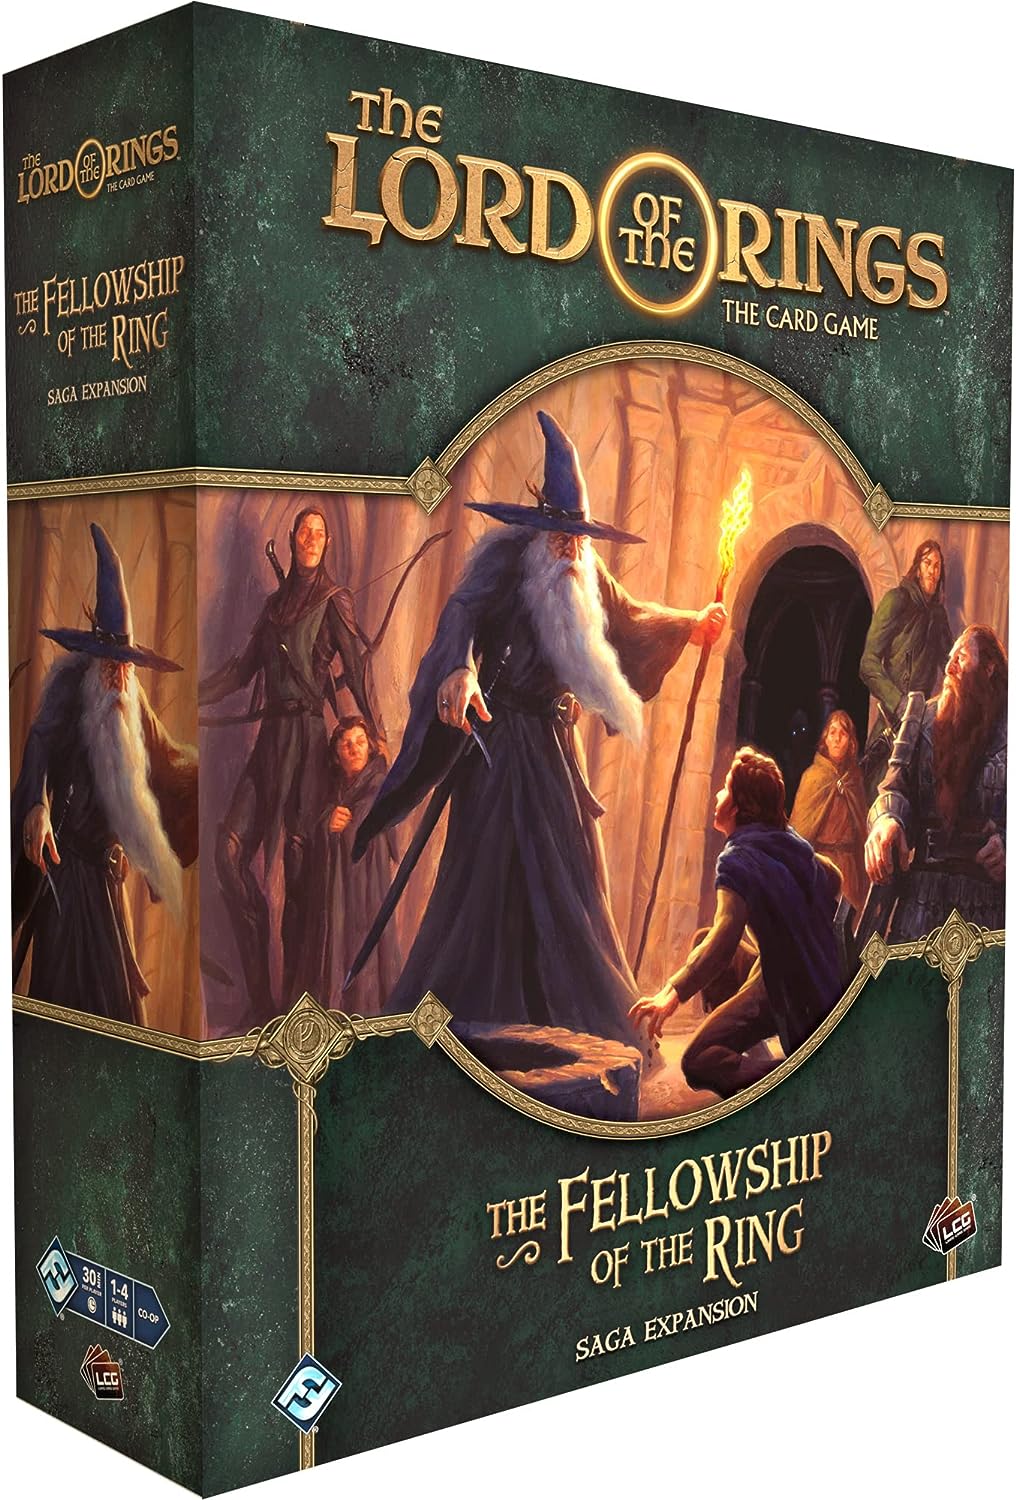 The Lord of the Rings The Card Game The Fellowship of the Ring